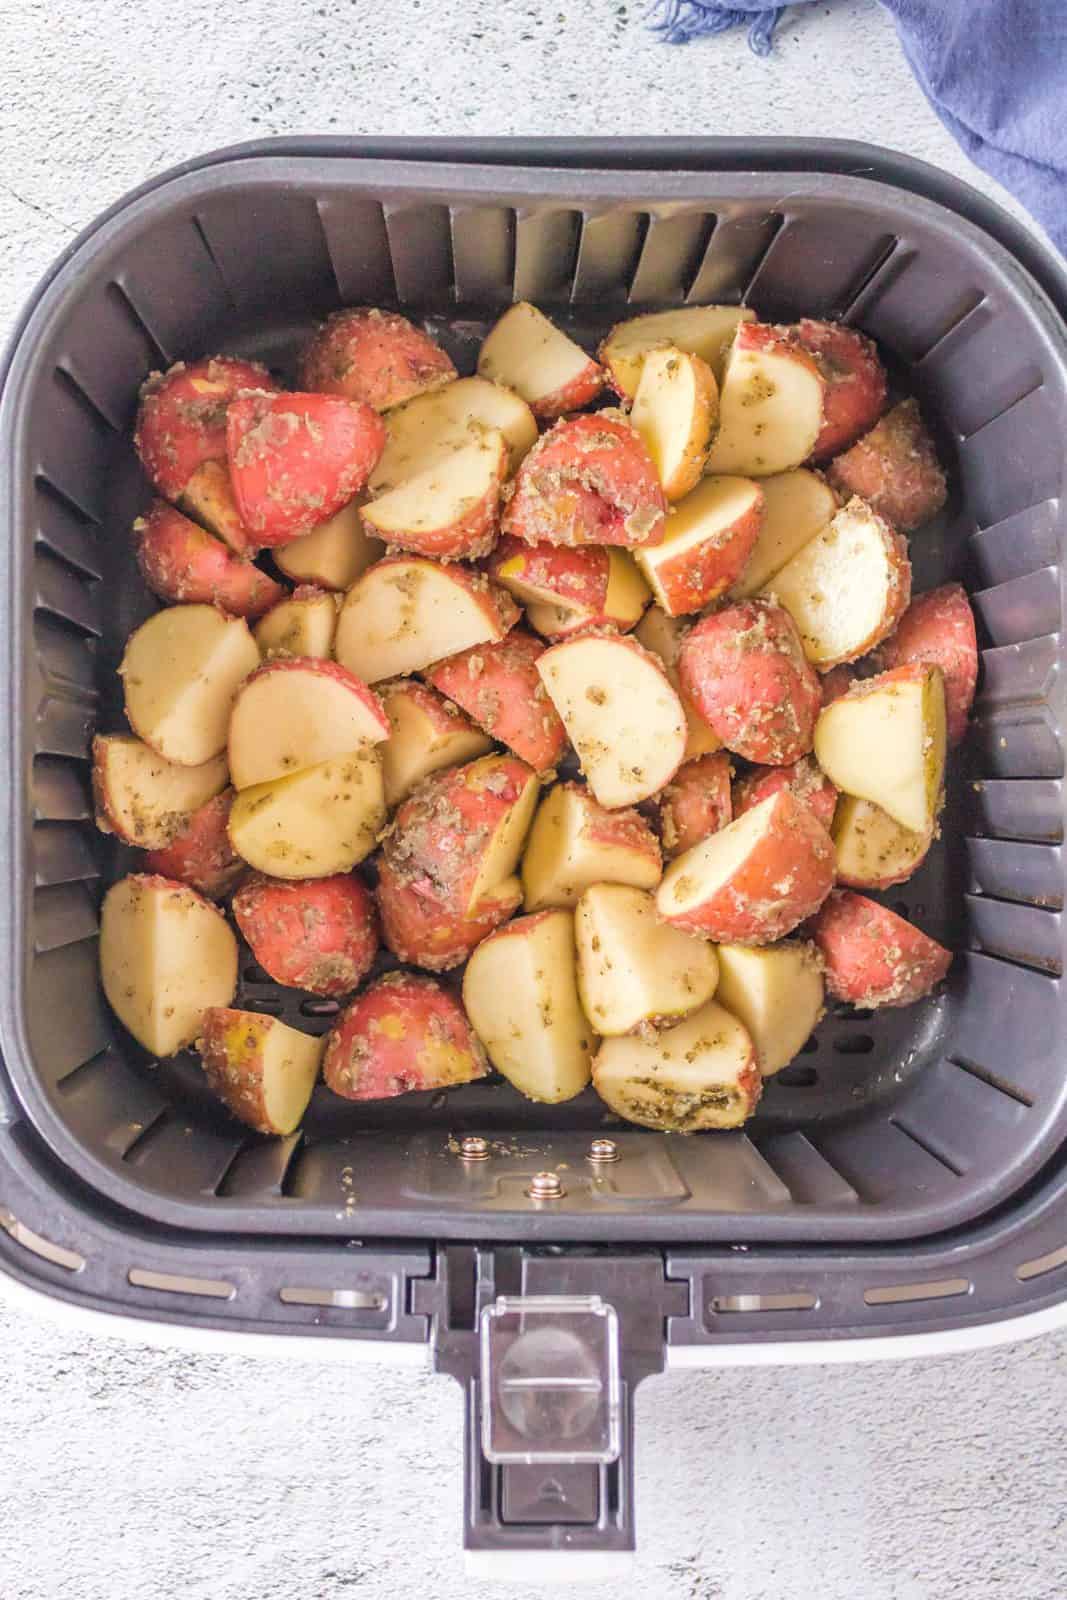 Coated potatoes added to air fryer basket.